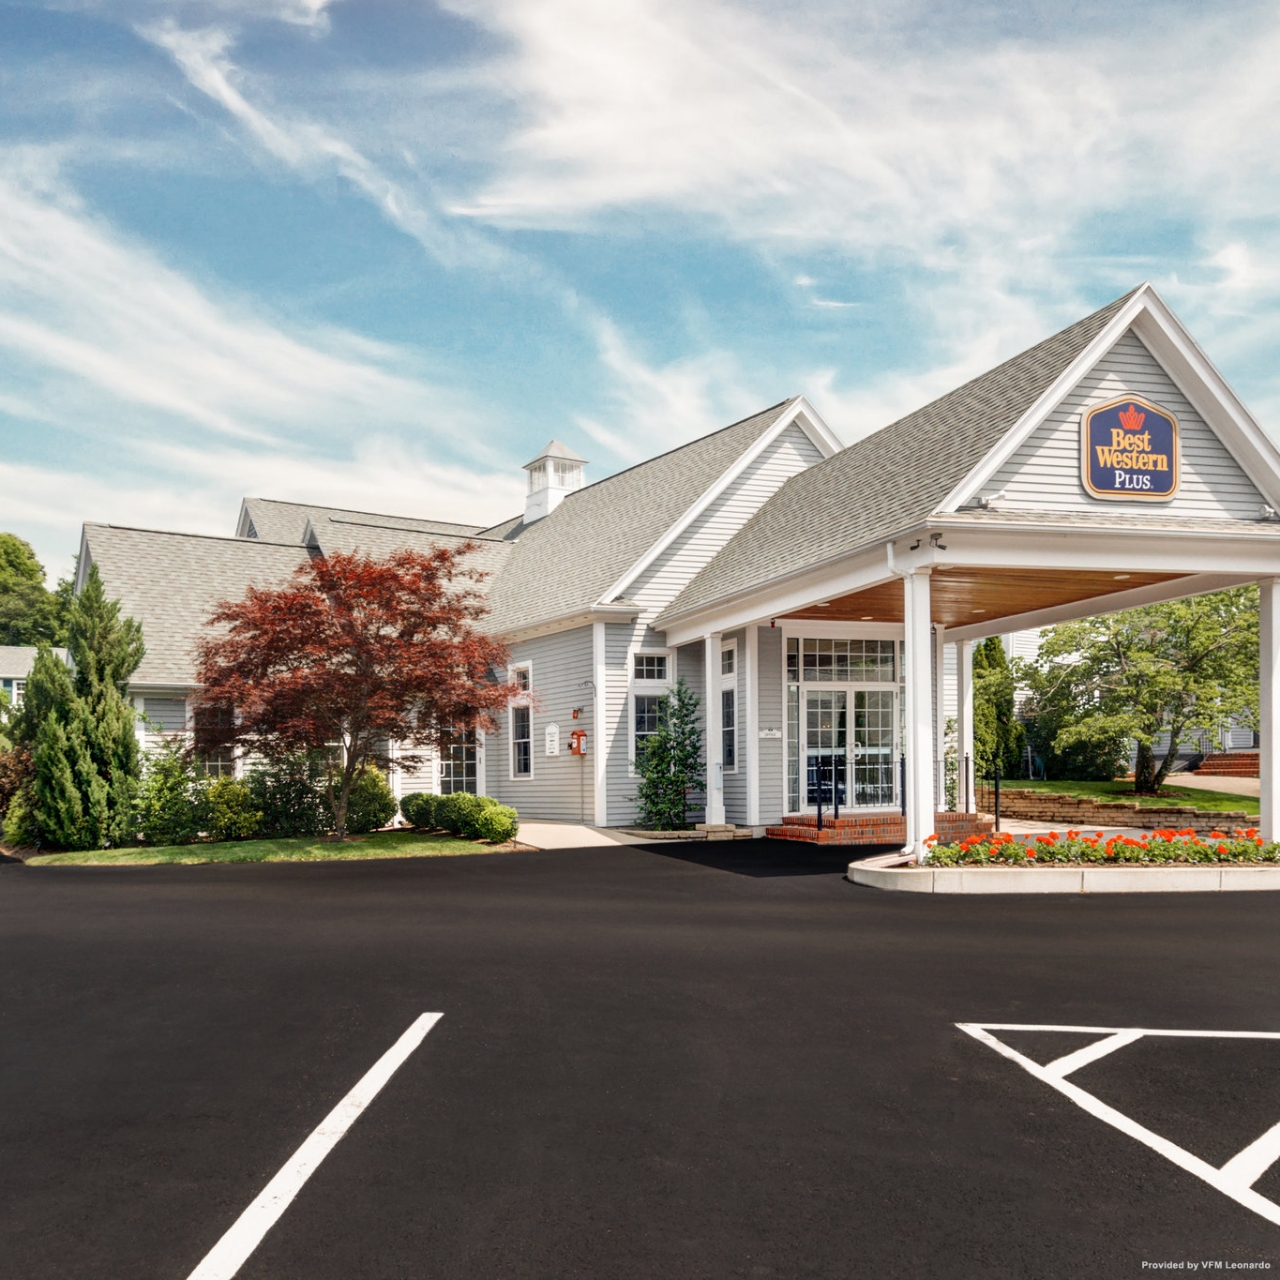 BEST WESTERN PLUS COLD SPRING | HRS